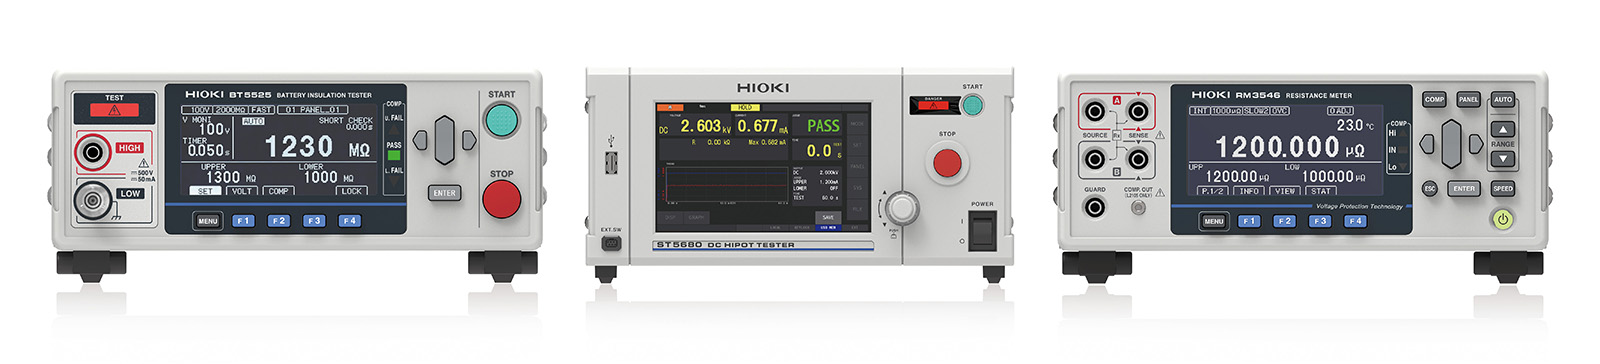 Hioki to Launch Three Battery Quality Testers in 2022 in Drive to Eliminate Battery Fires